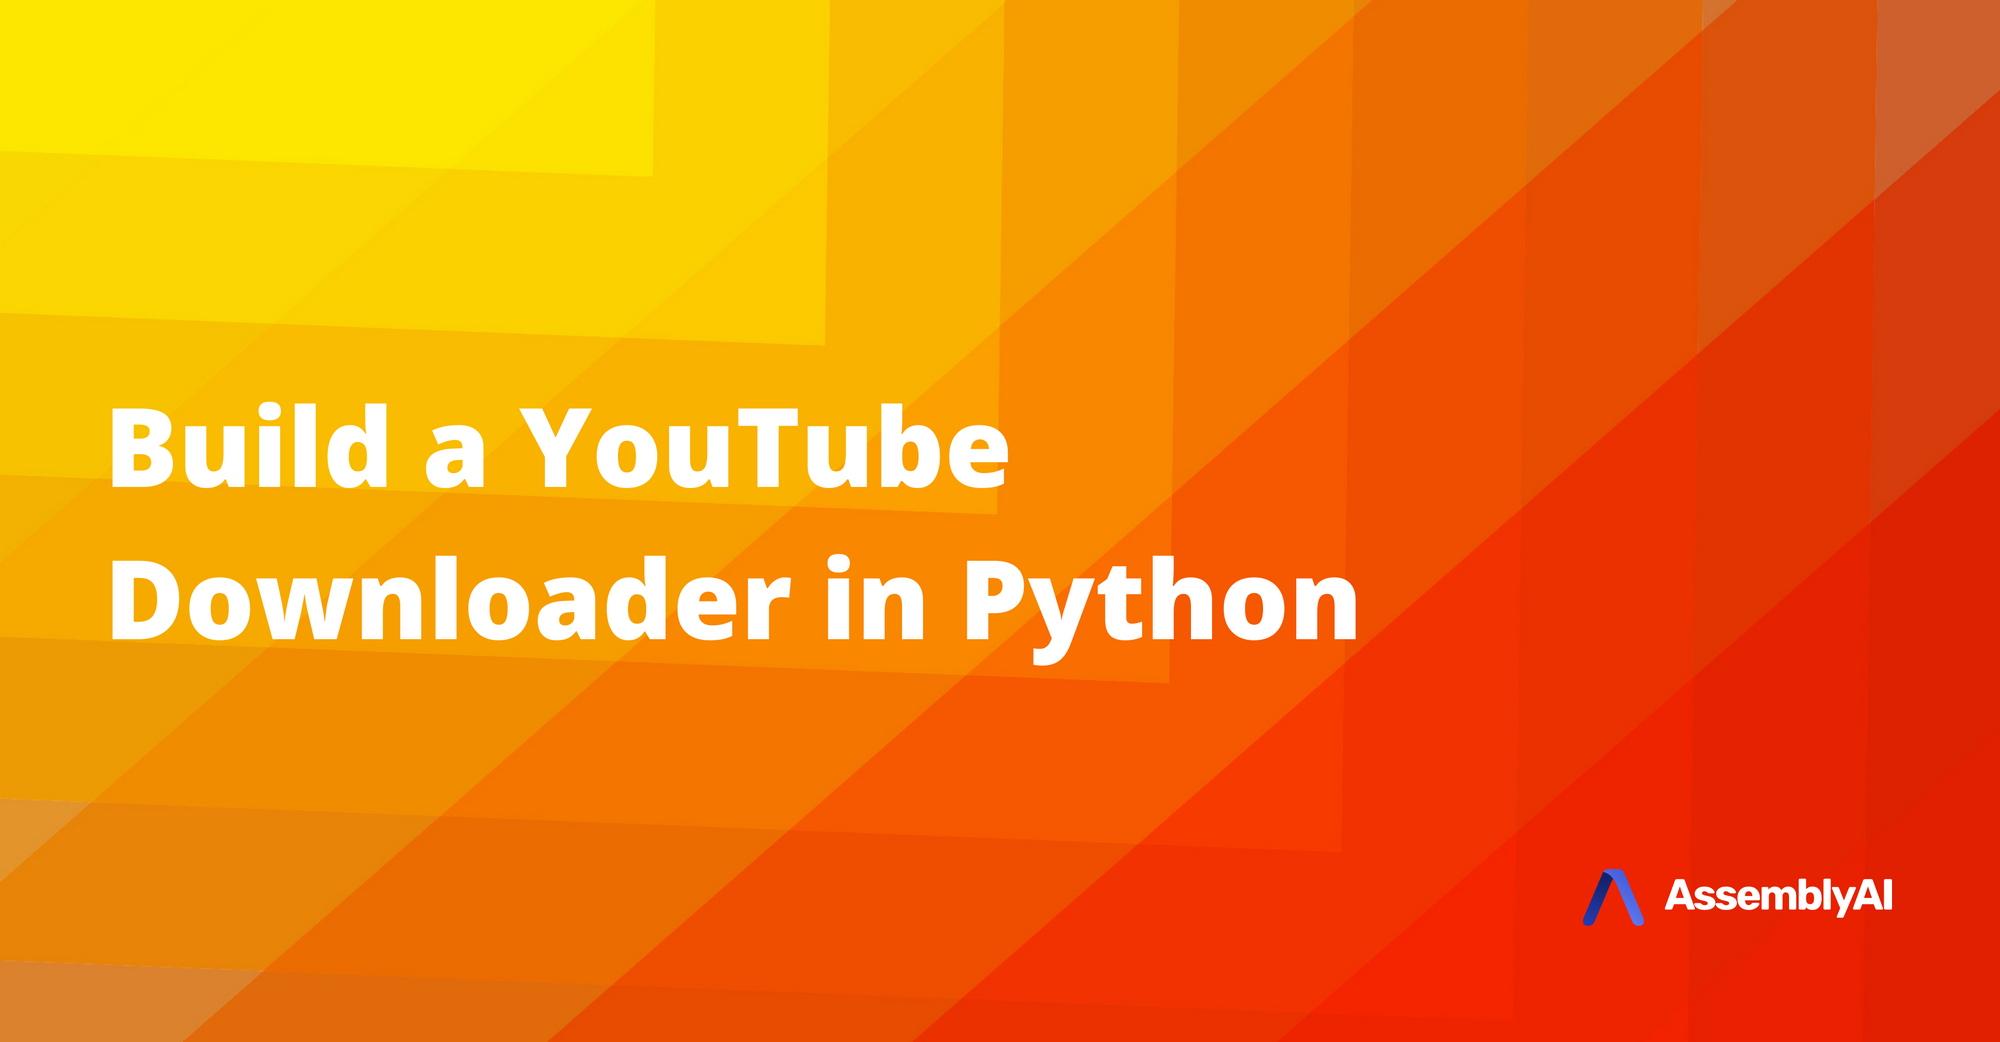 How to build a YouTube downloader in Python